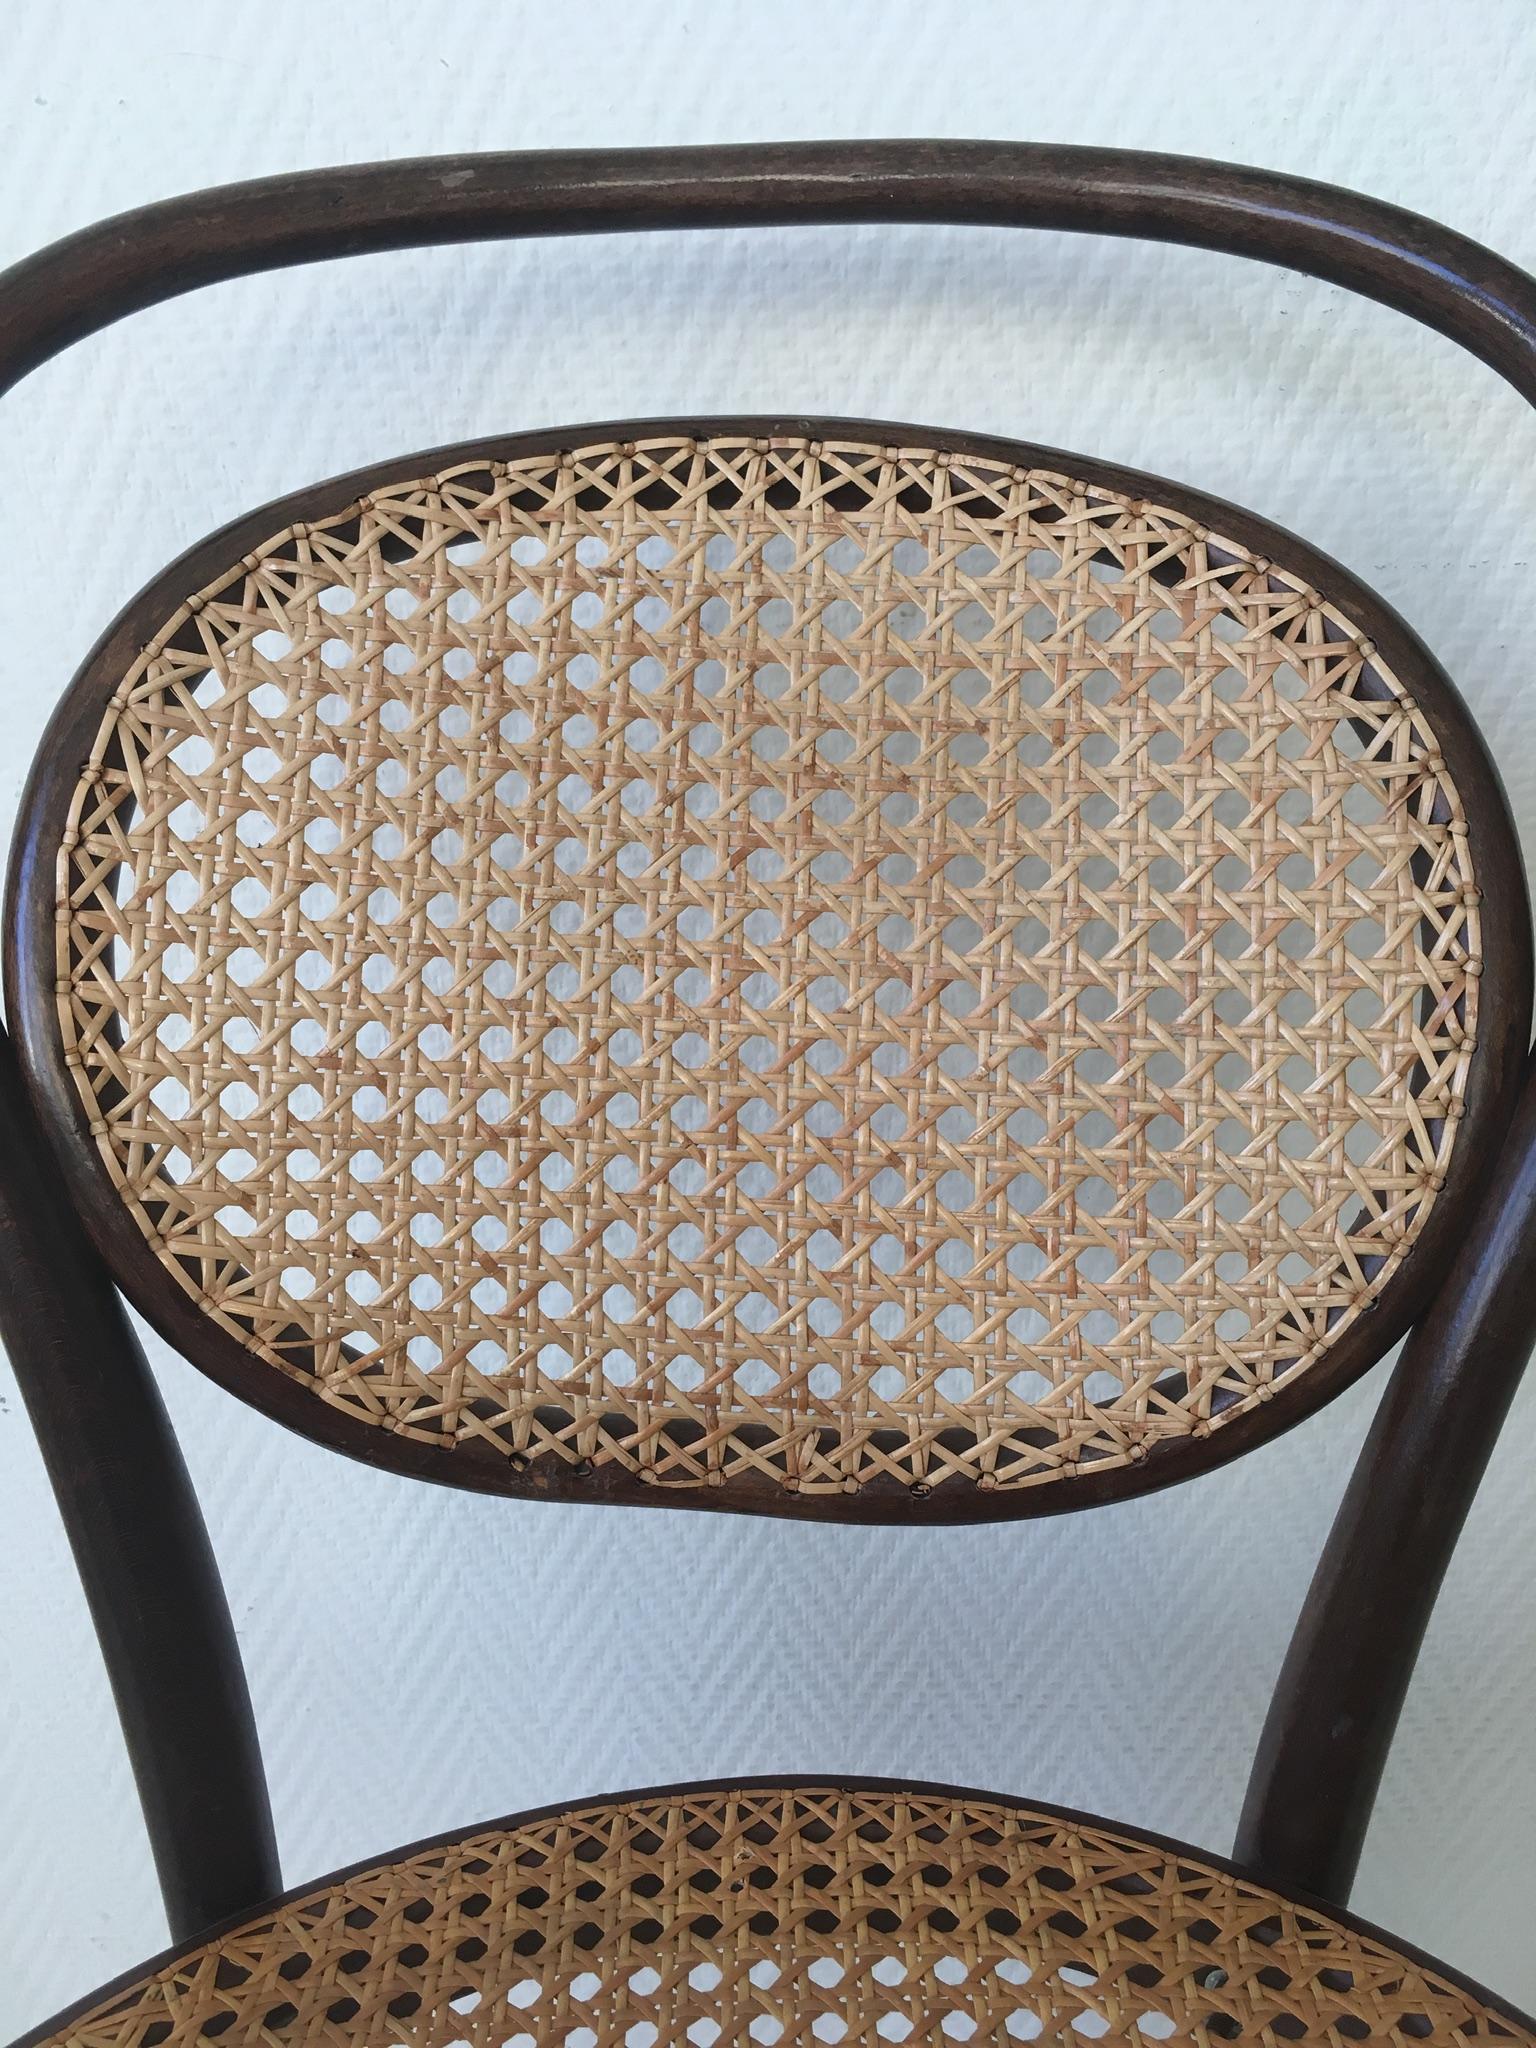 ZPM Radomsko, Former Thonet, No. 11 Bentwood and Rattan Dining Room Chairs 4